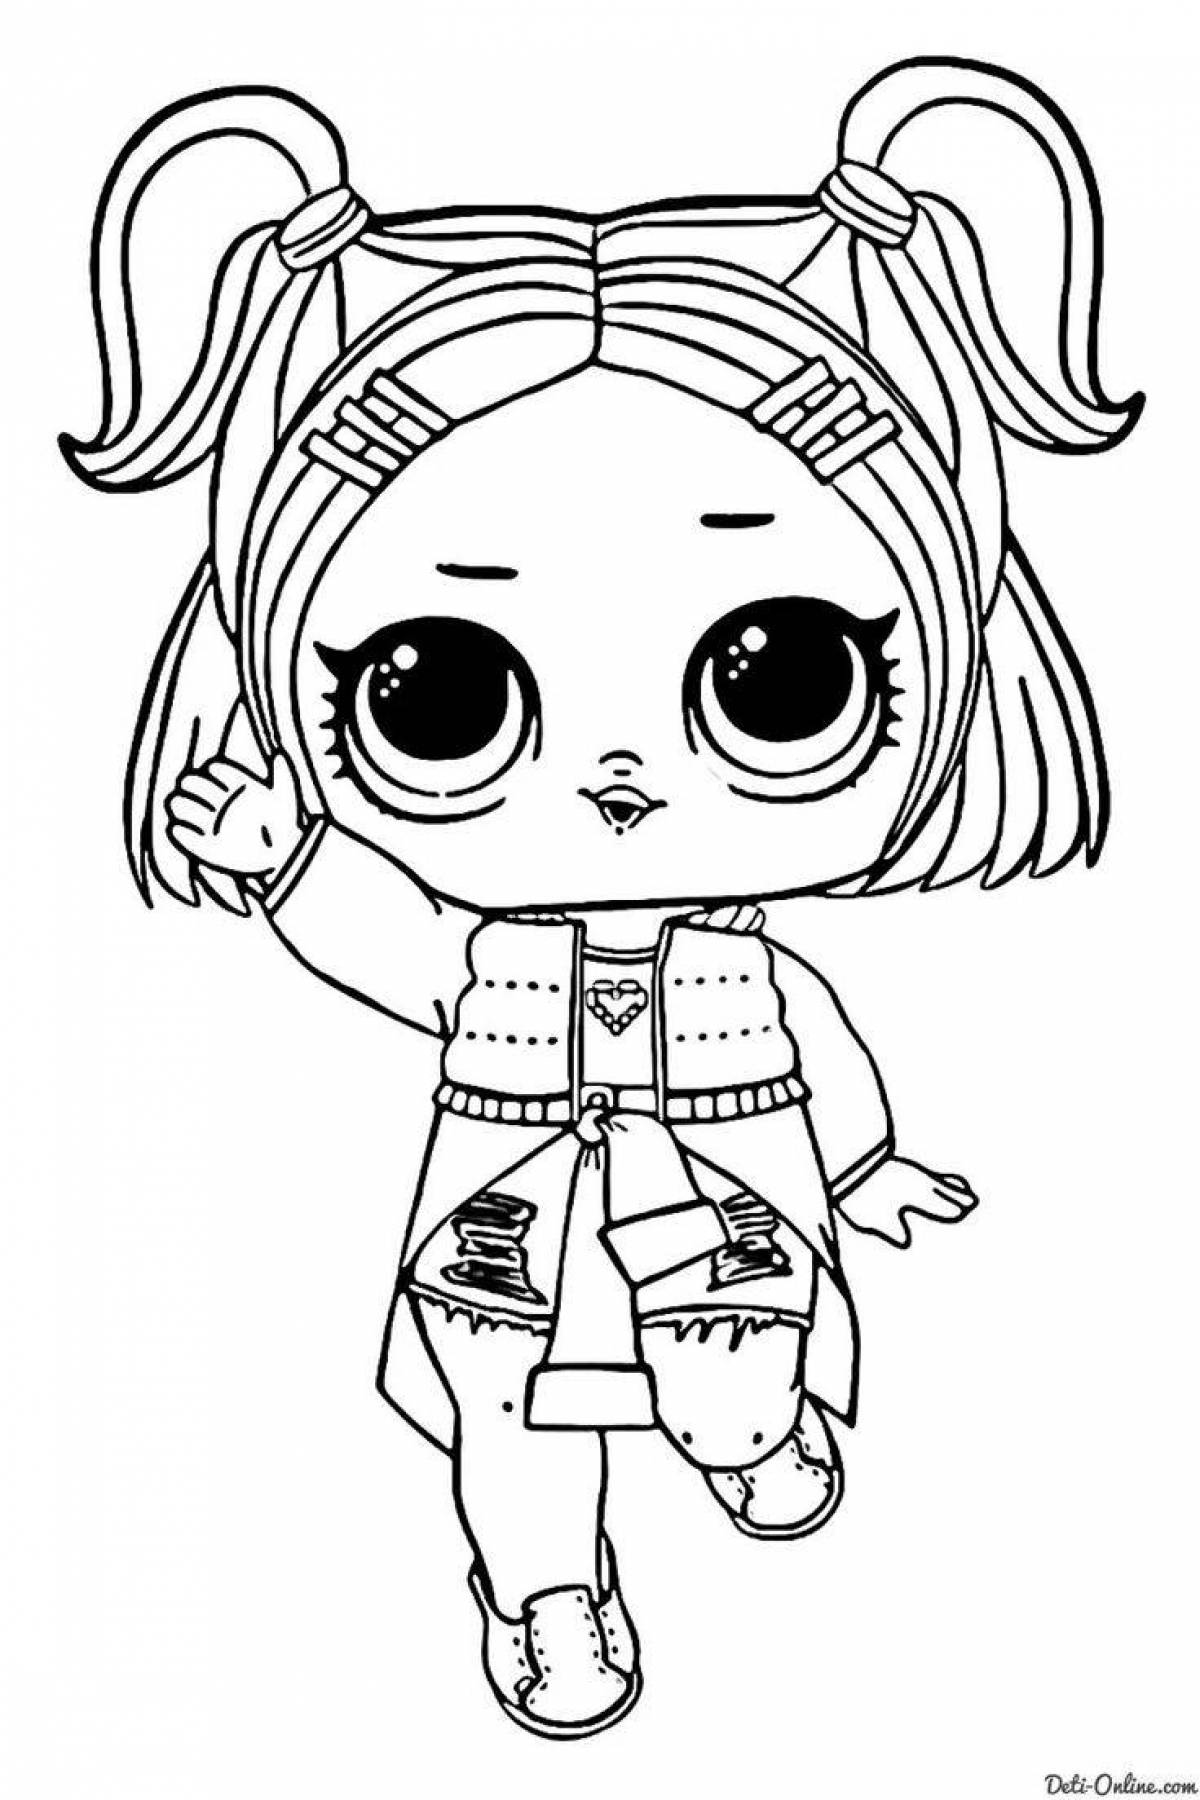 Bright lola doll coloring page